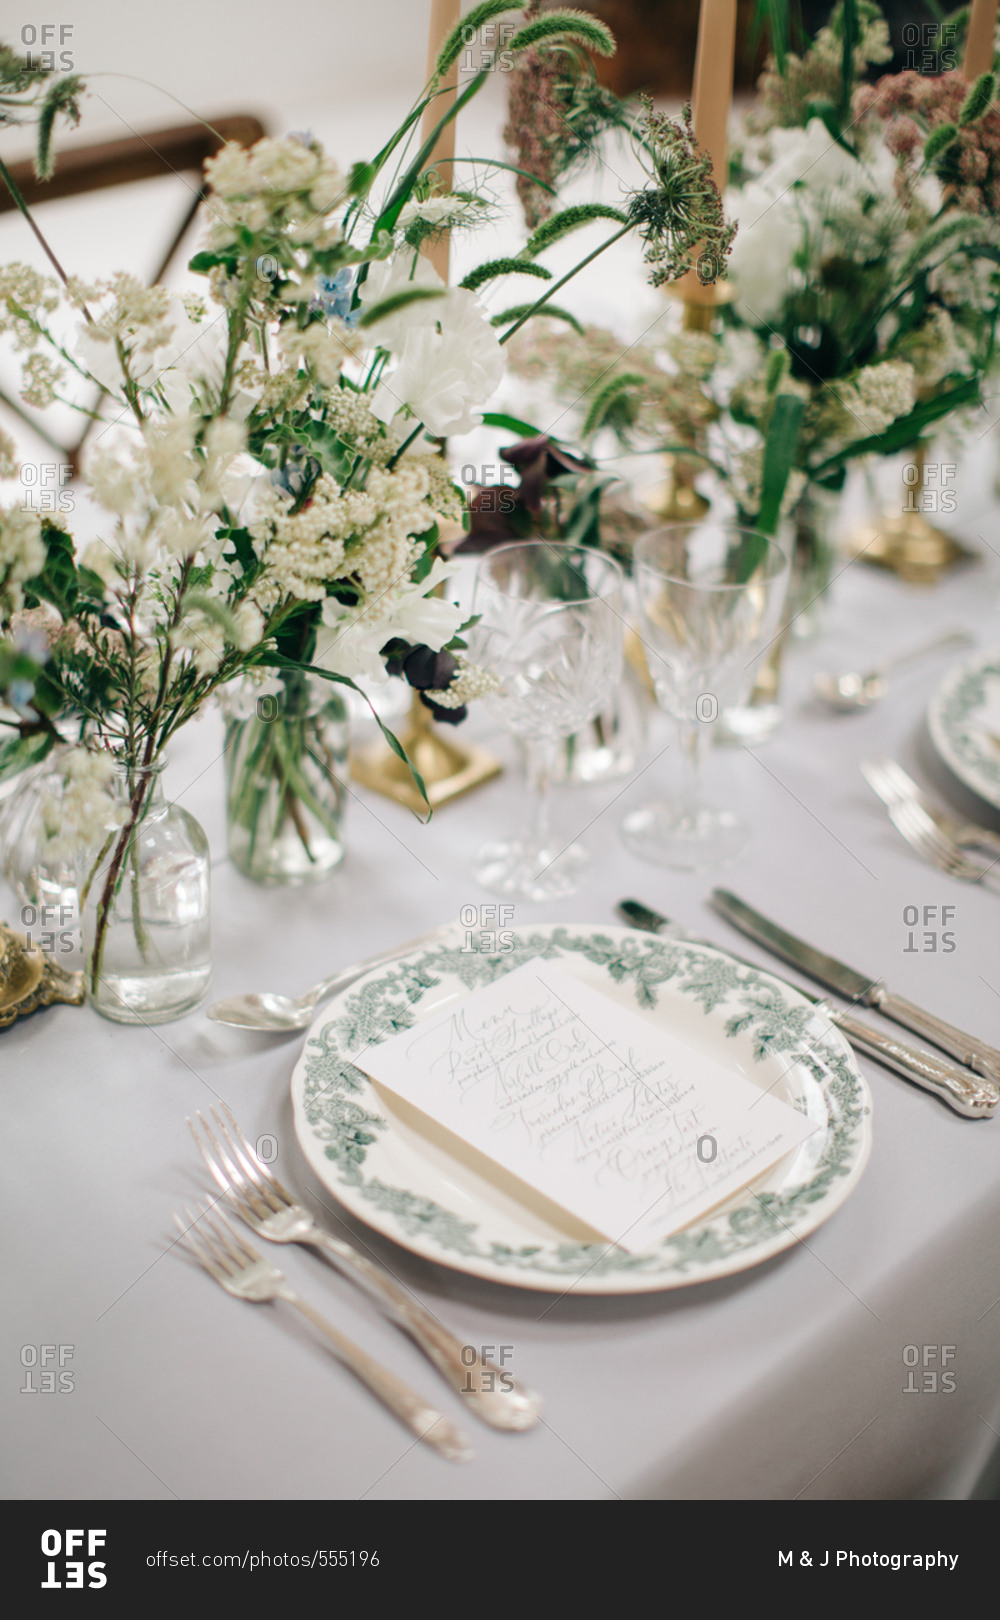 Printed menu card on table set with white wildflowers